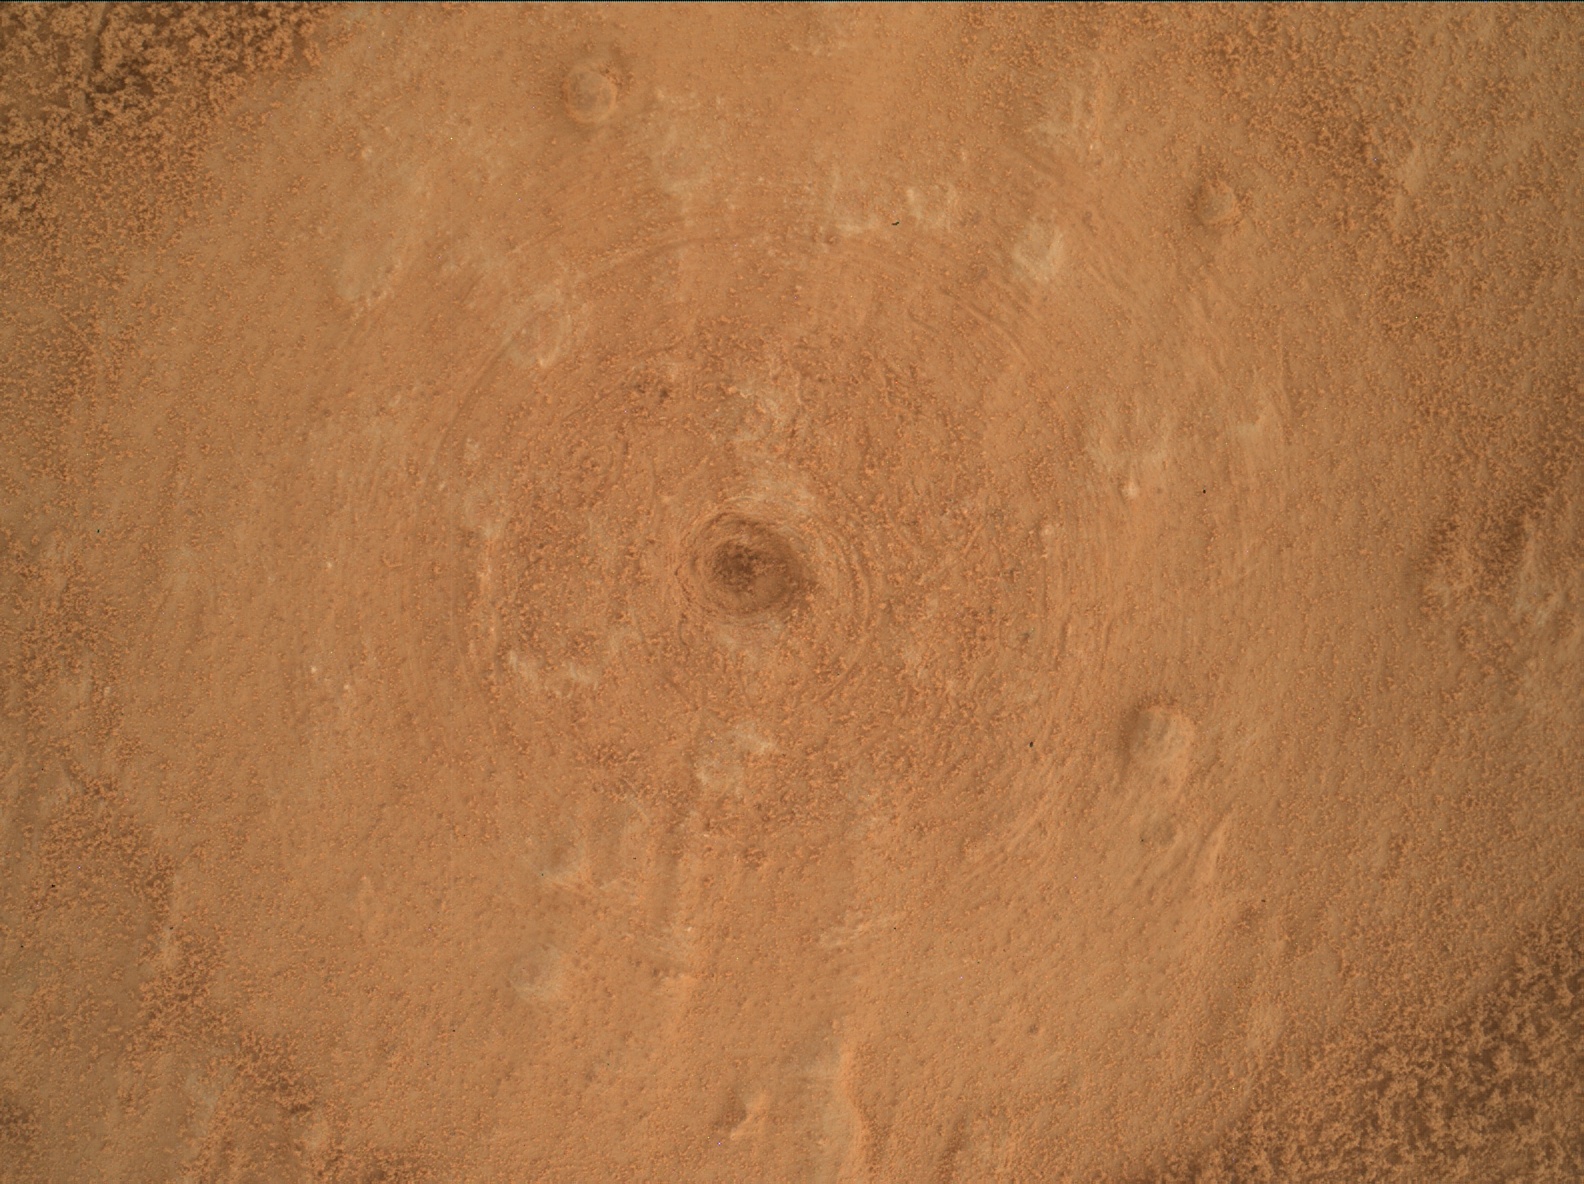 Nasa's Mars rover Curiosity acquired this image using its Mars Hand Lens Imager (MAHLI) on Sol 3511